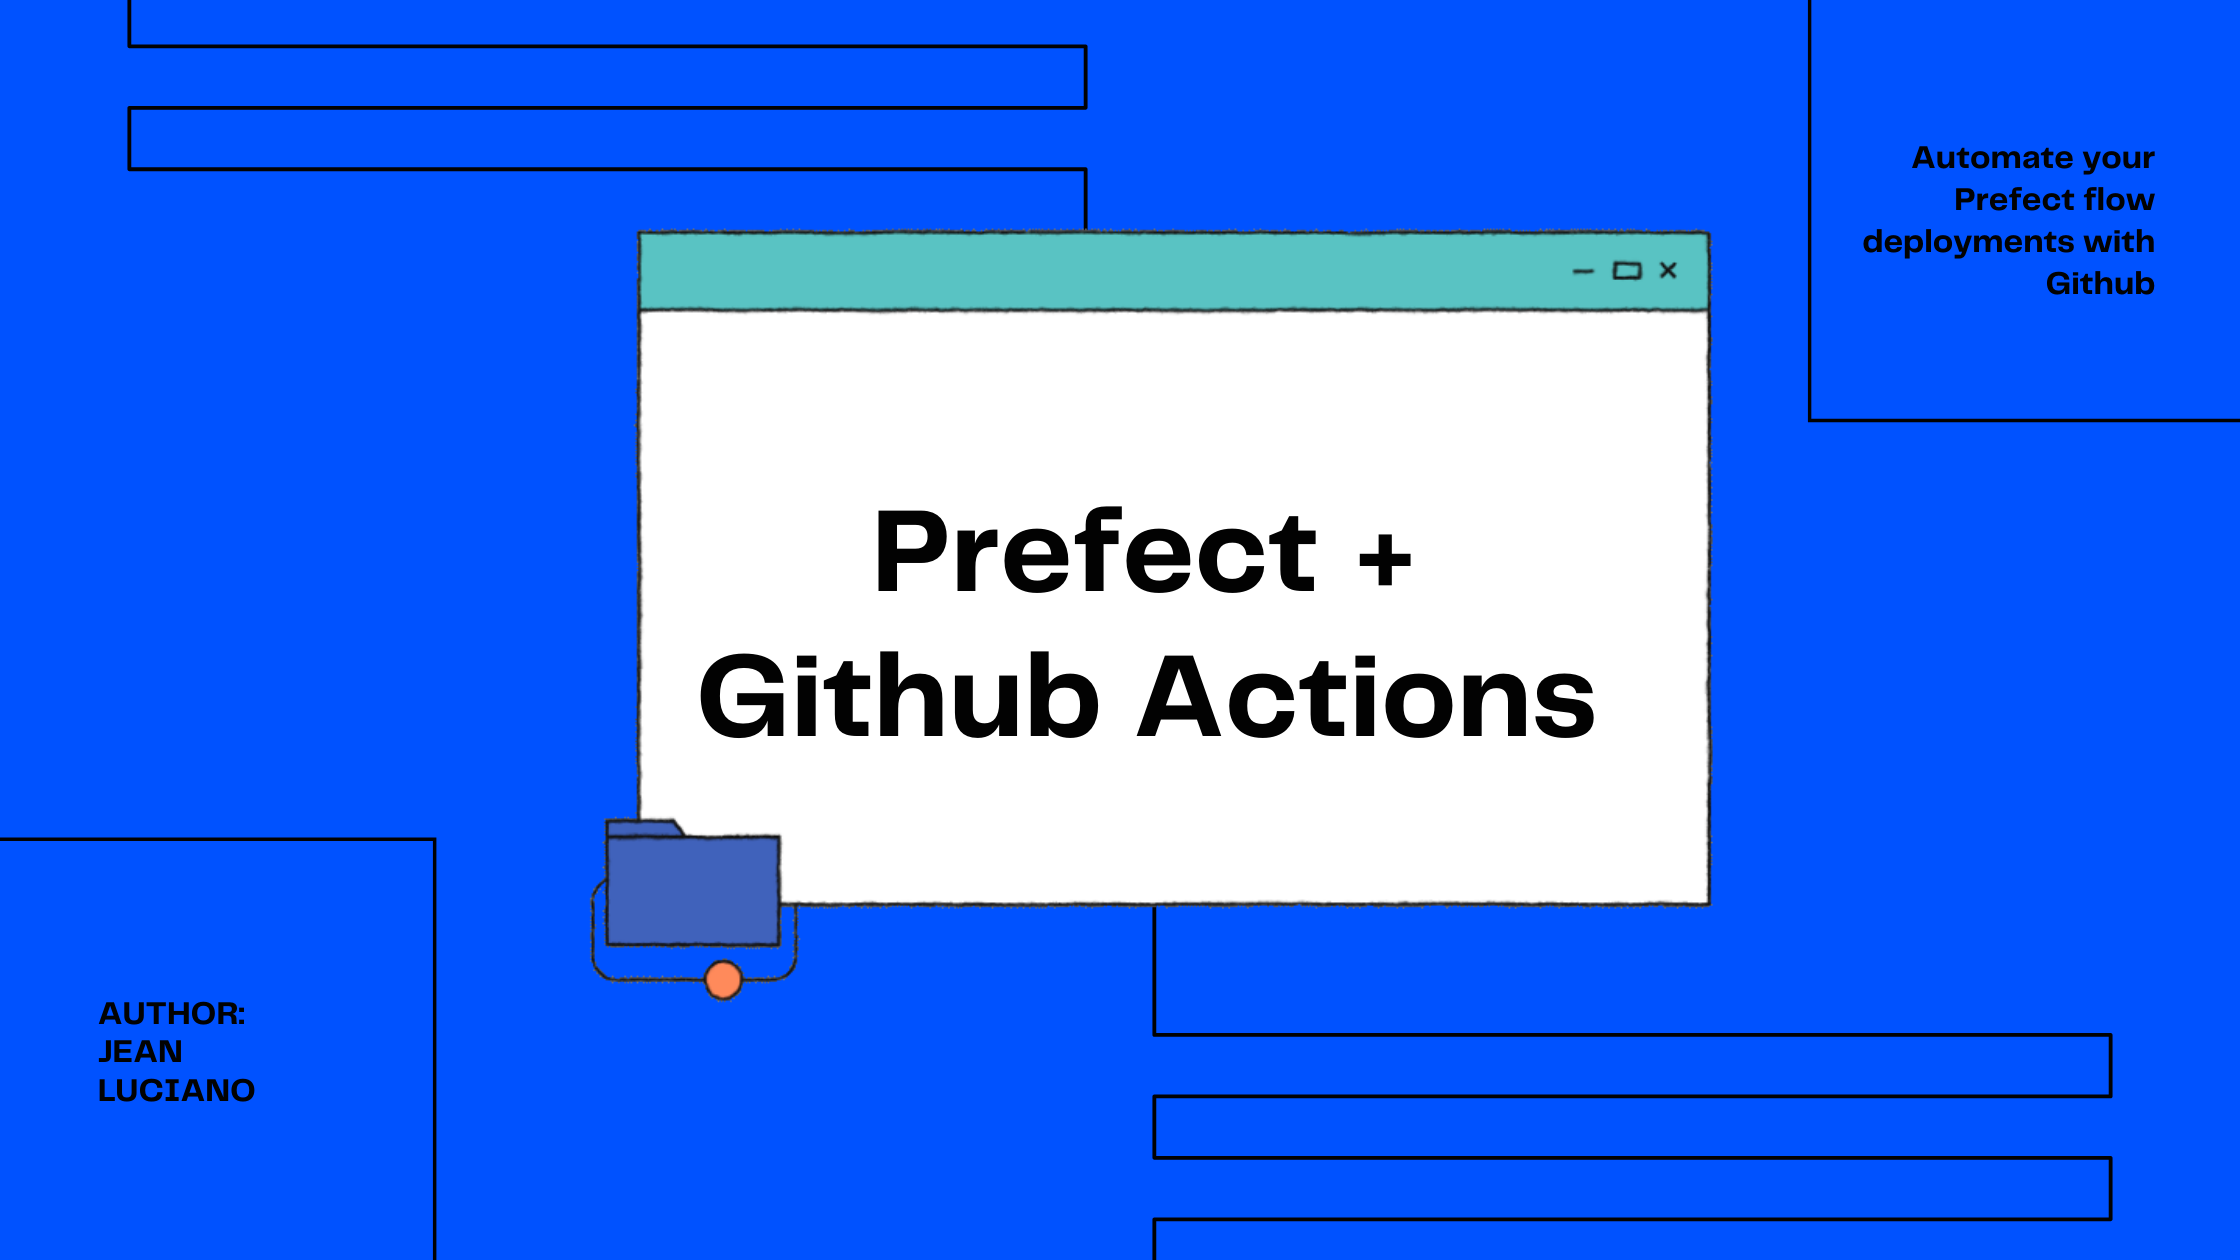 Deploying Prefect flows with Github Actions